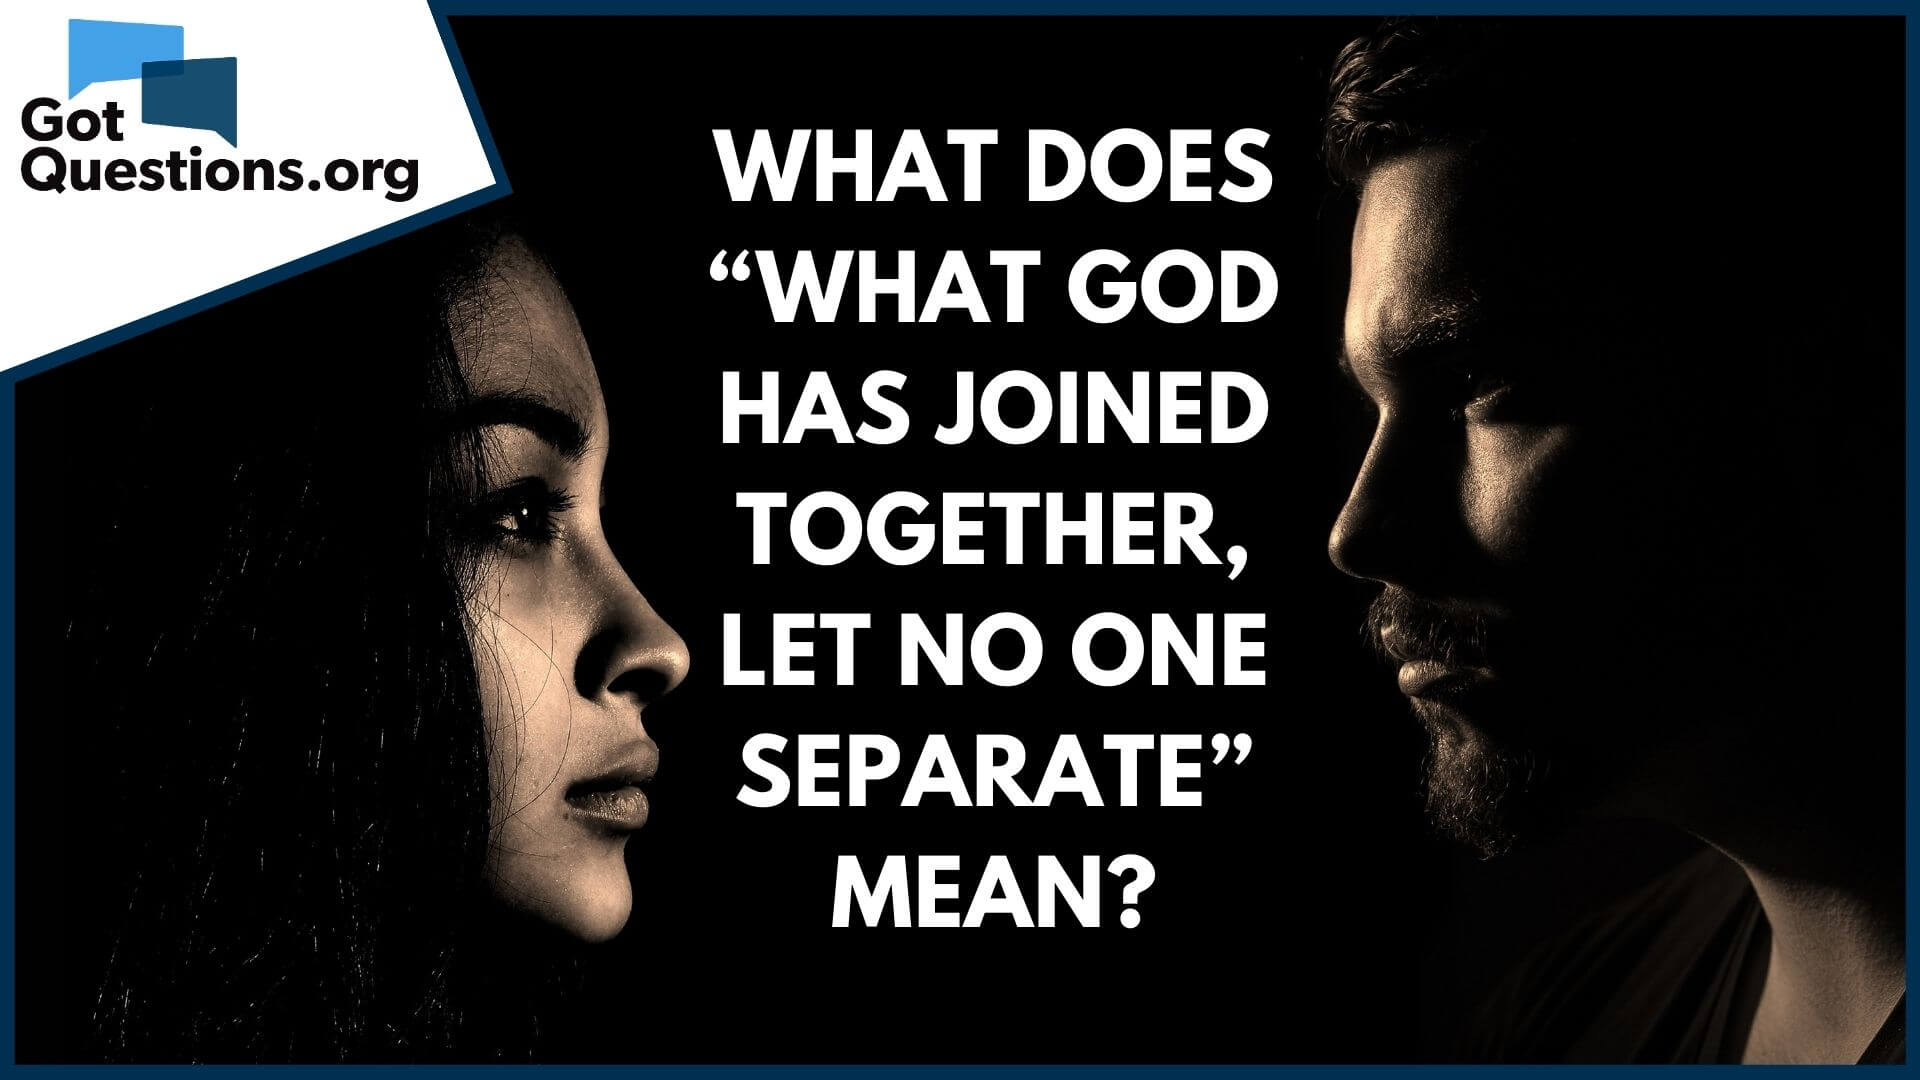 What does “what God has joined together, let no one separate” mean?